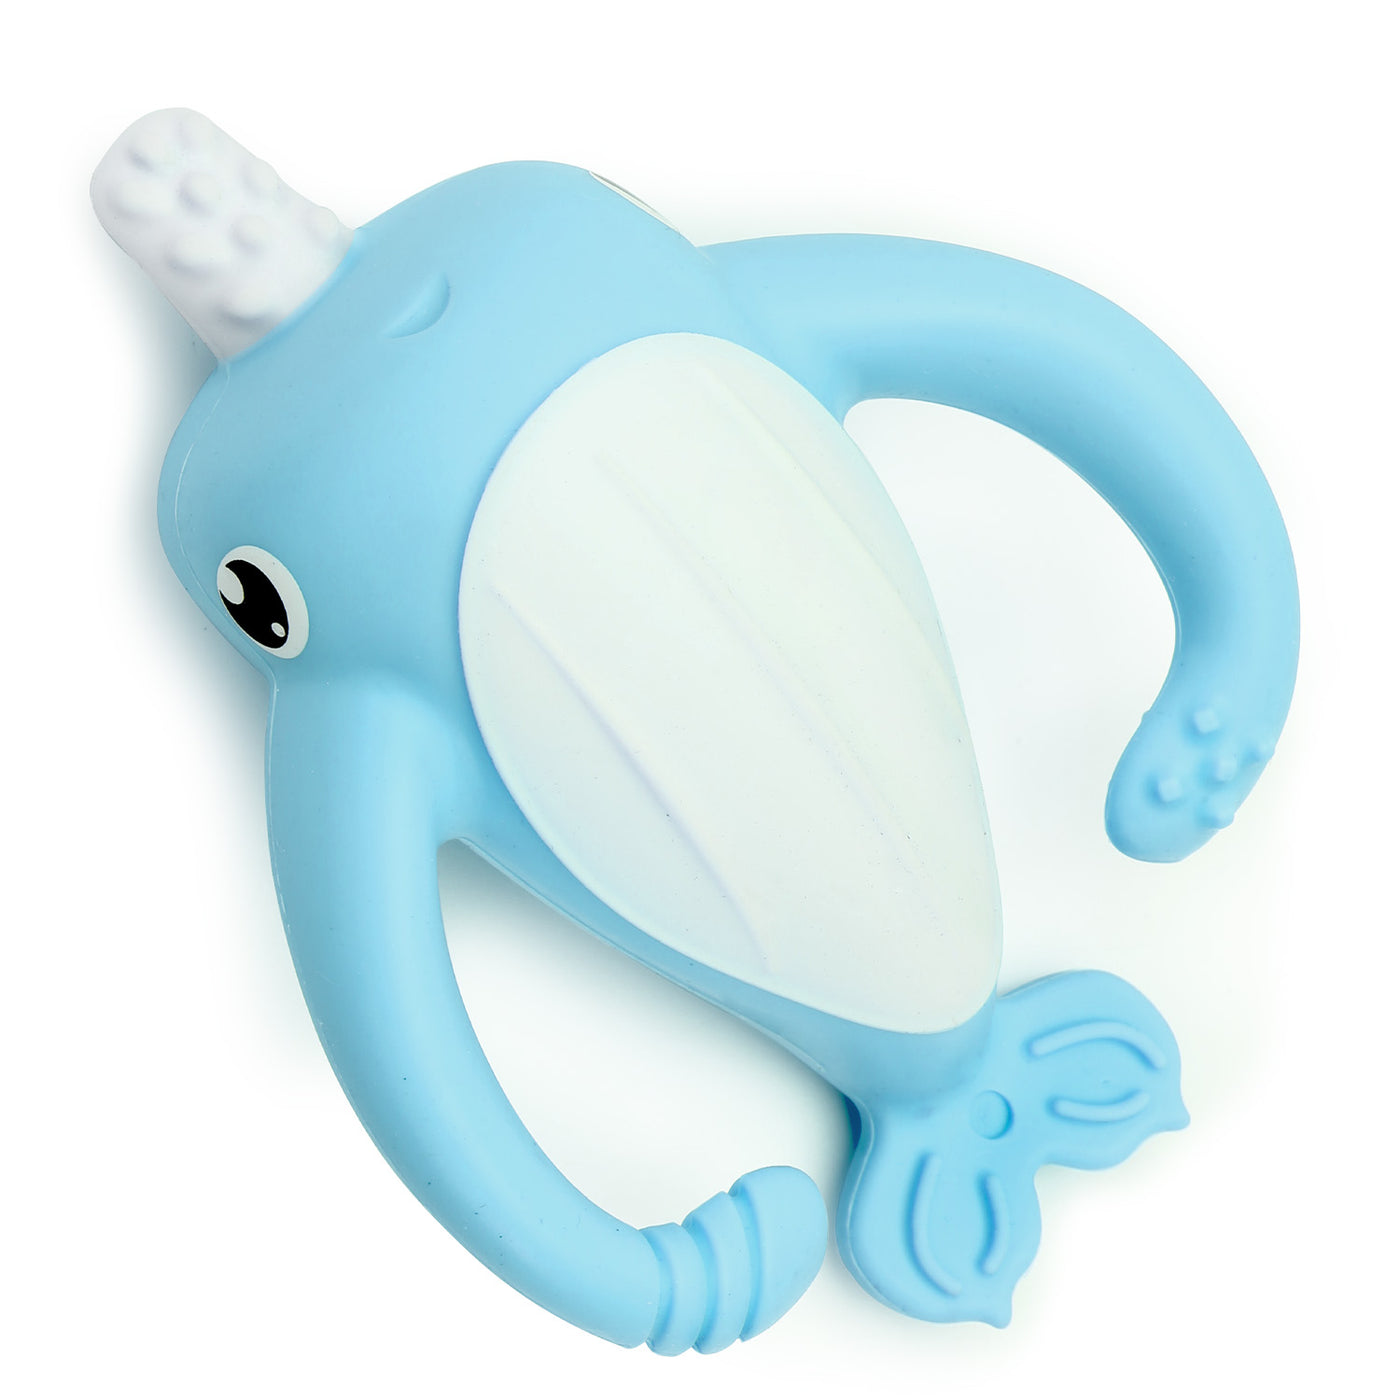 Narwhal Two Handles Baby Teething Toothbrush & Toys for 3M+ Infants